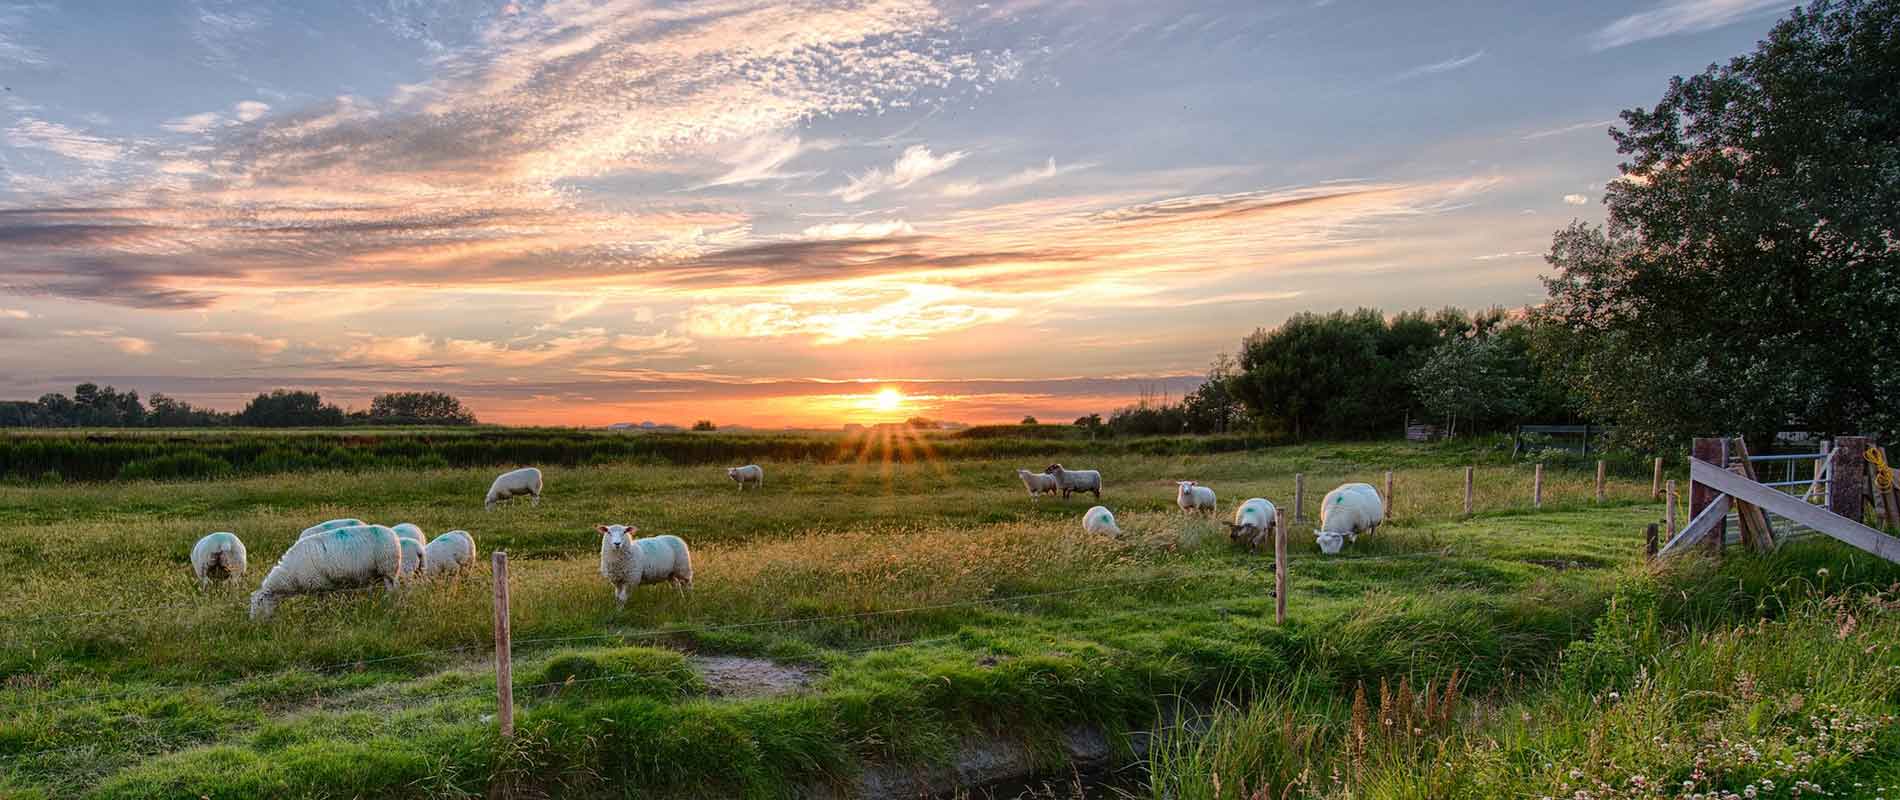 Sheep grass on a green pasture with a fence in the front as the sun sets in the background and illuminates the clouds. In the far back there are trees as well as on the right of the picture.